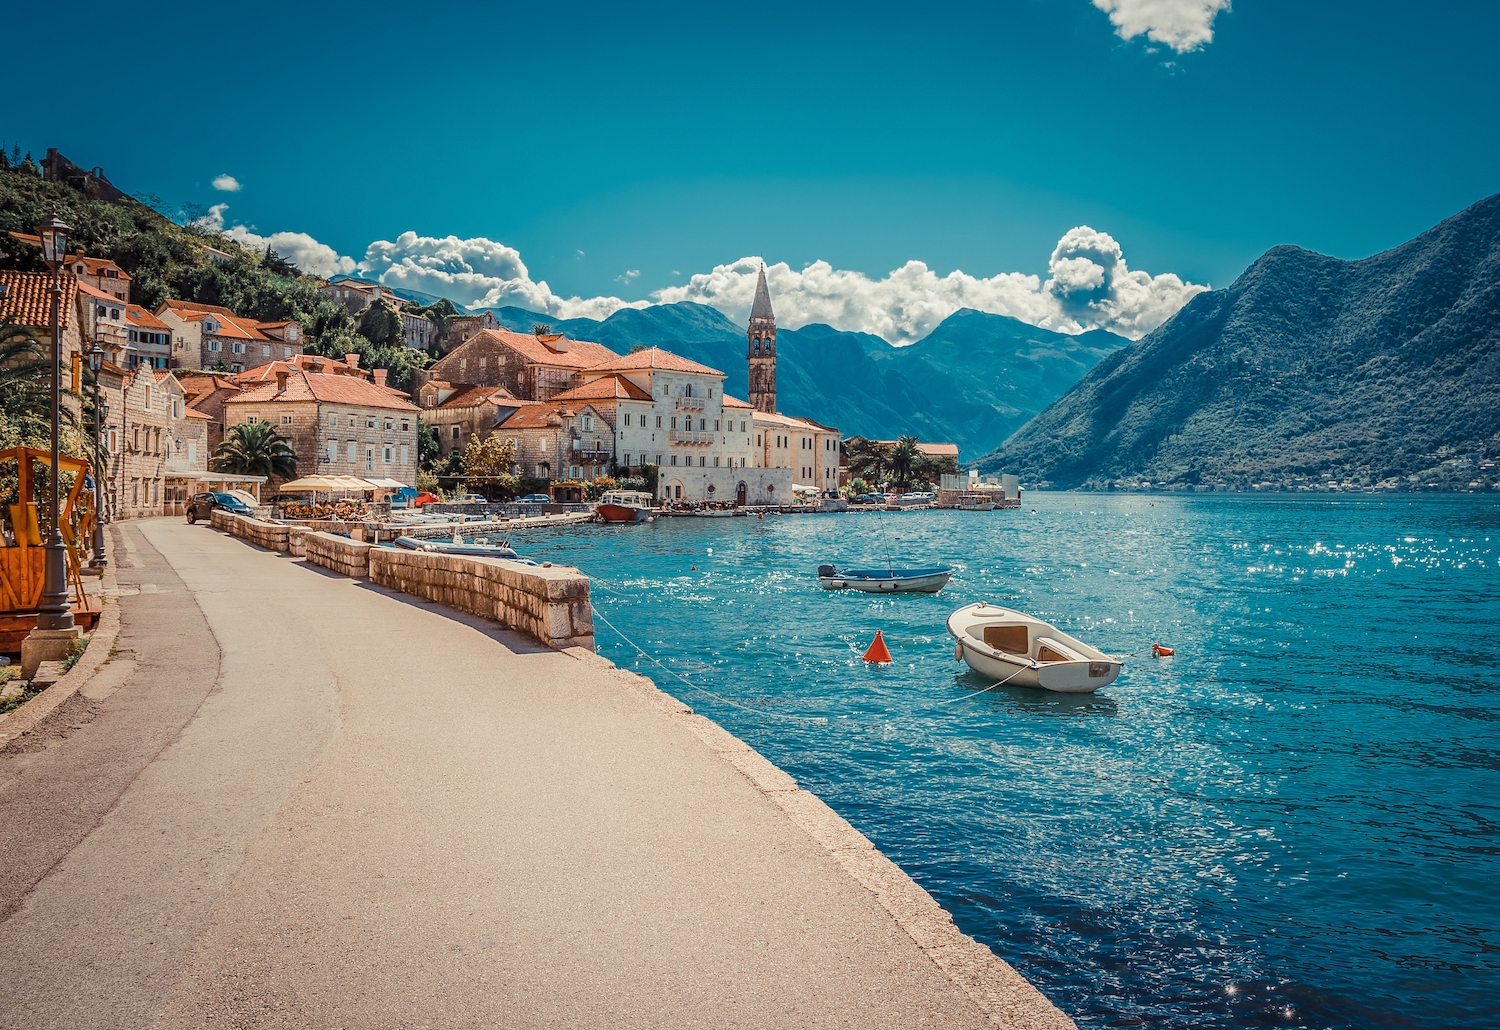 View along the harbor of Perast, Montenegro